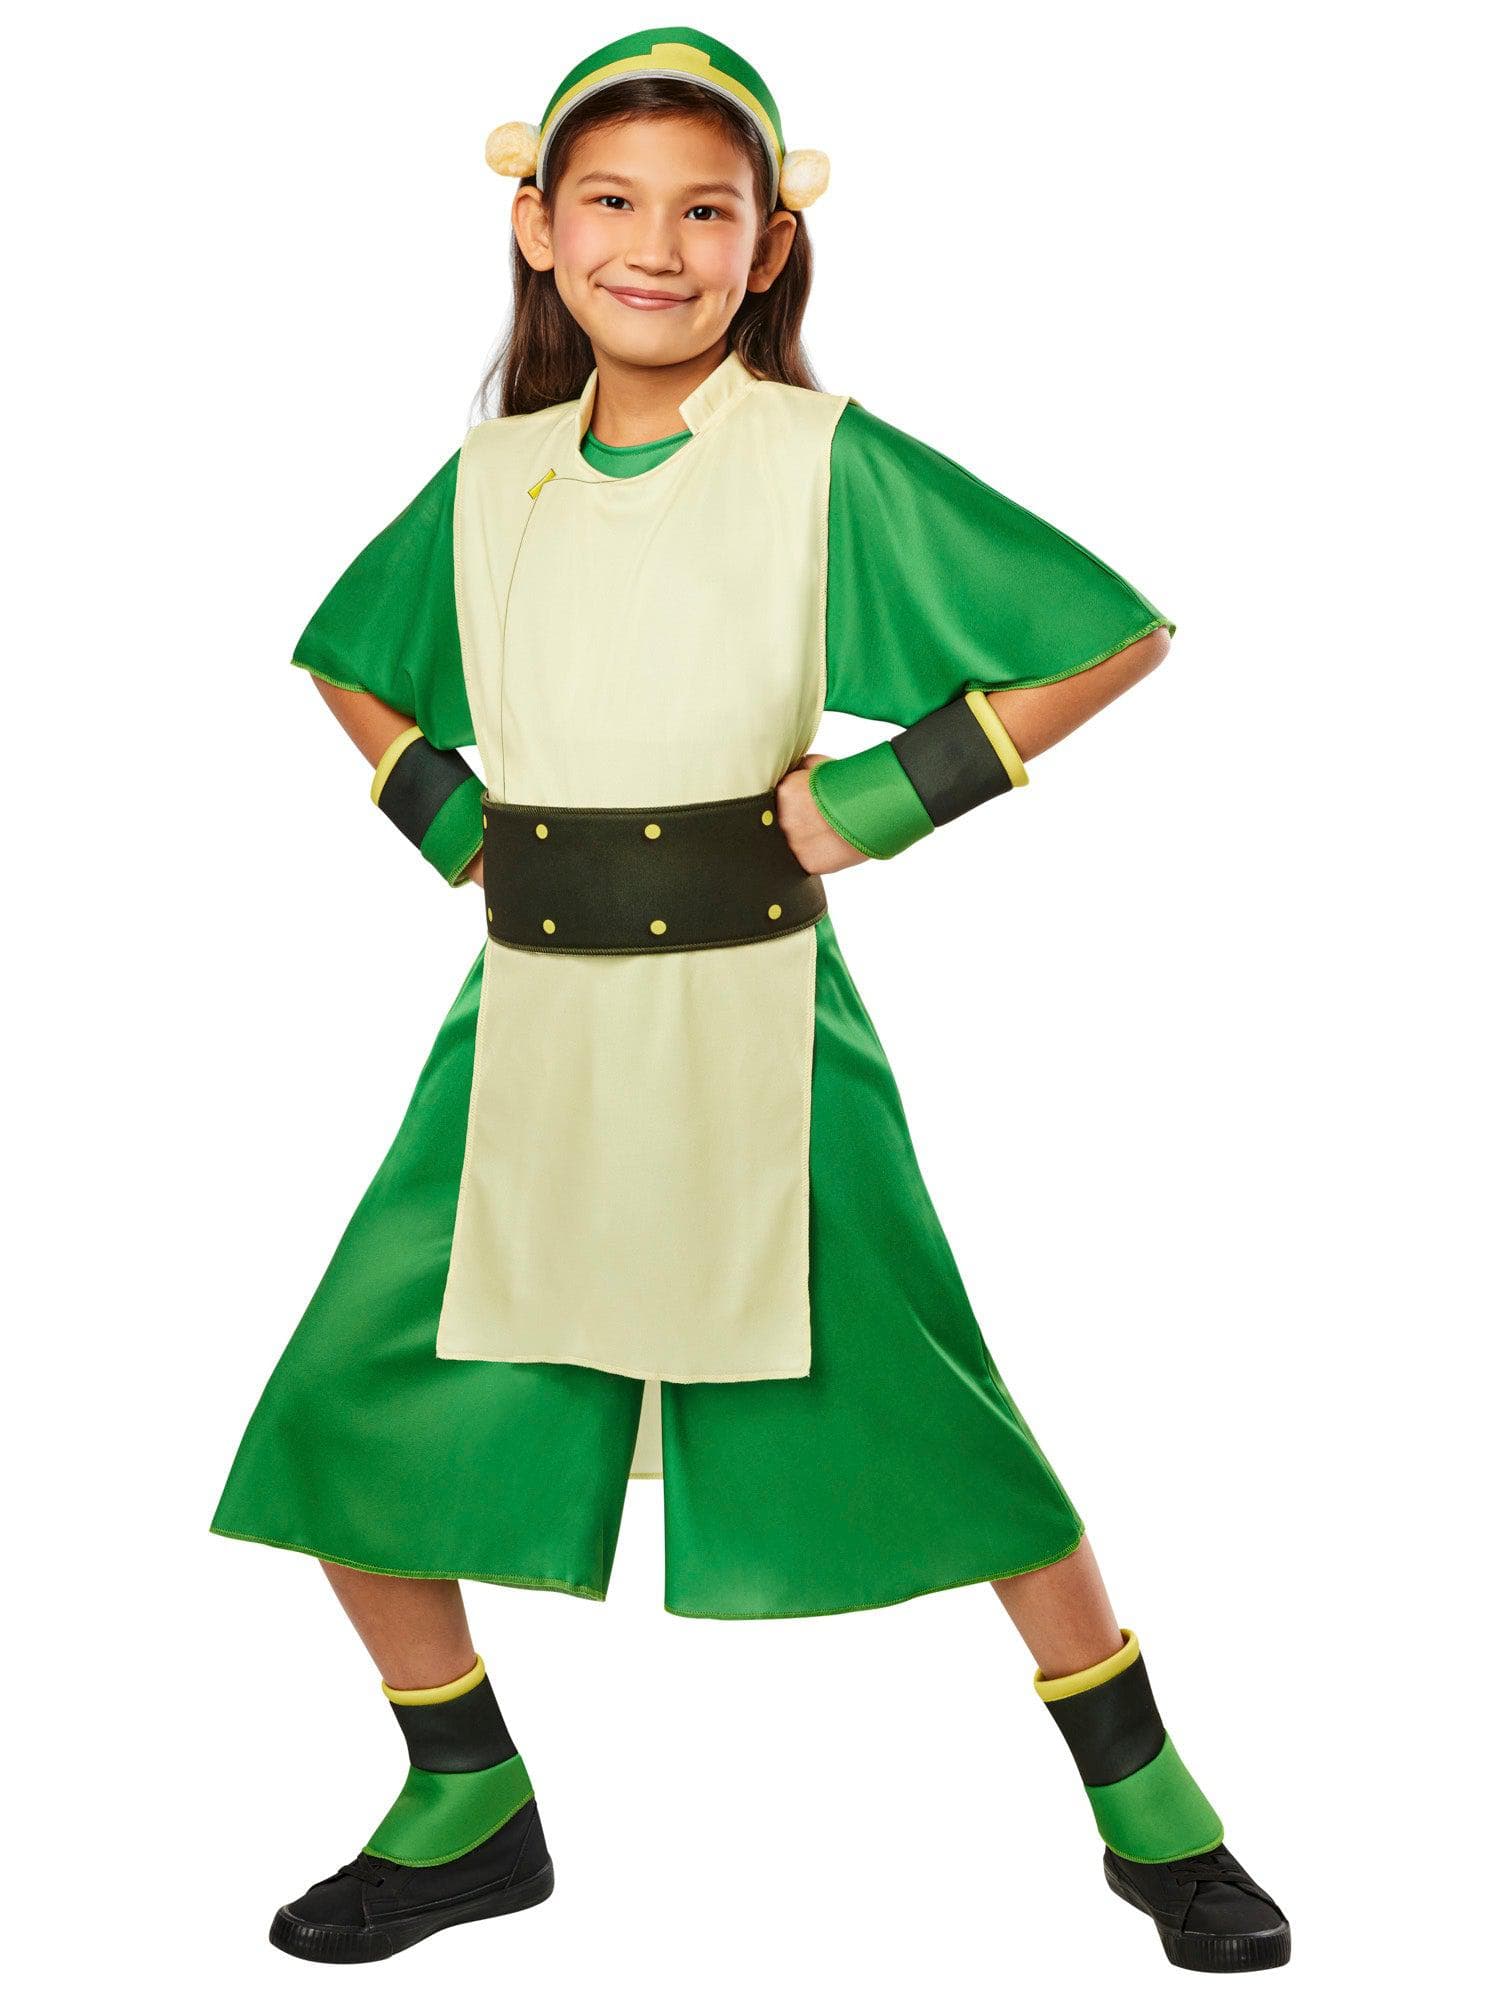 Girls' Avatar: The Last Airbender Toph Beifong Costume - costumes.com